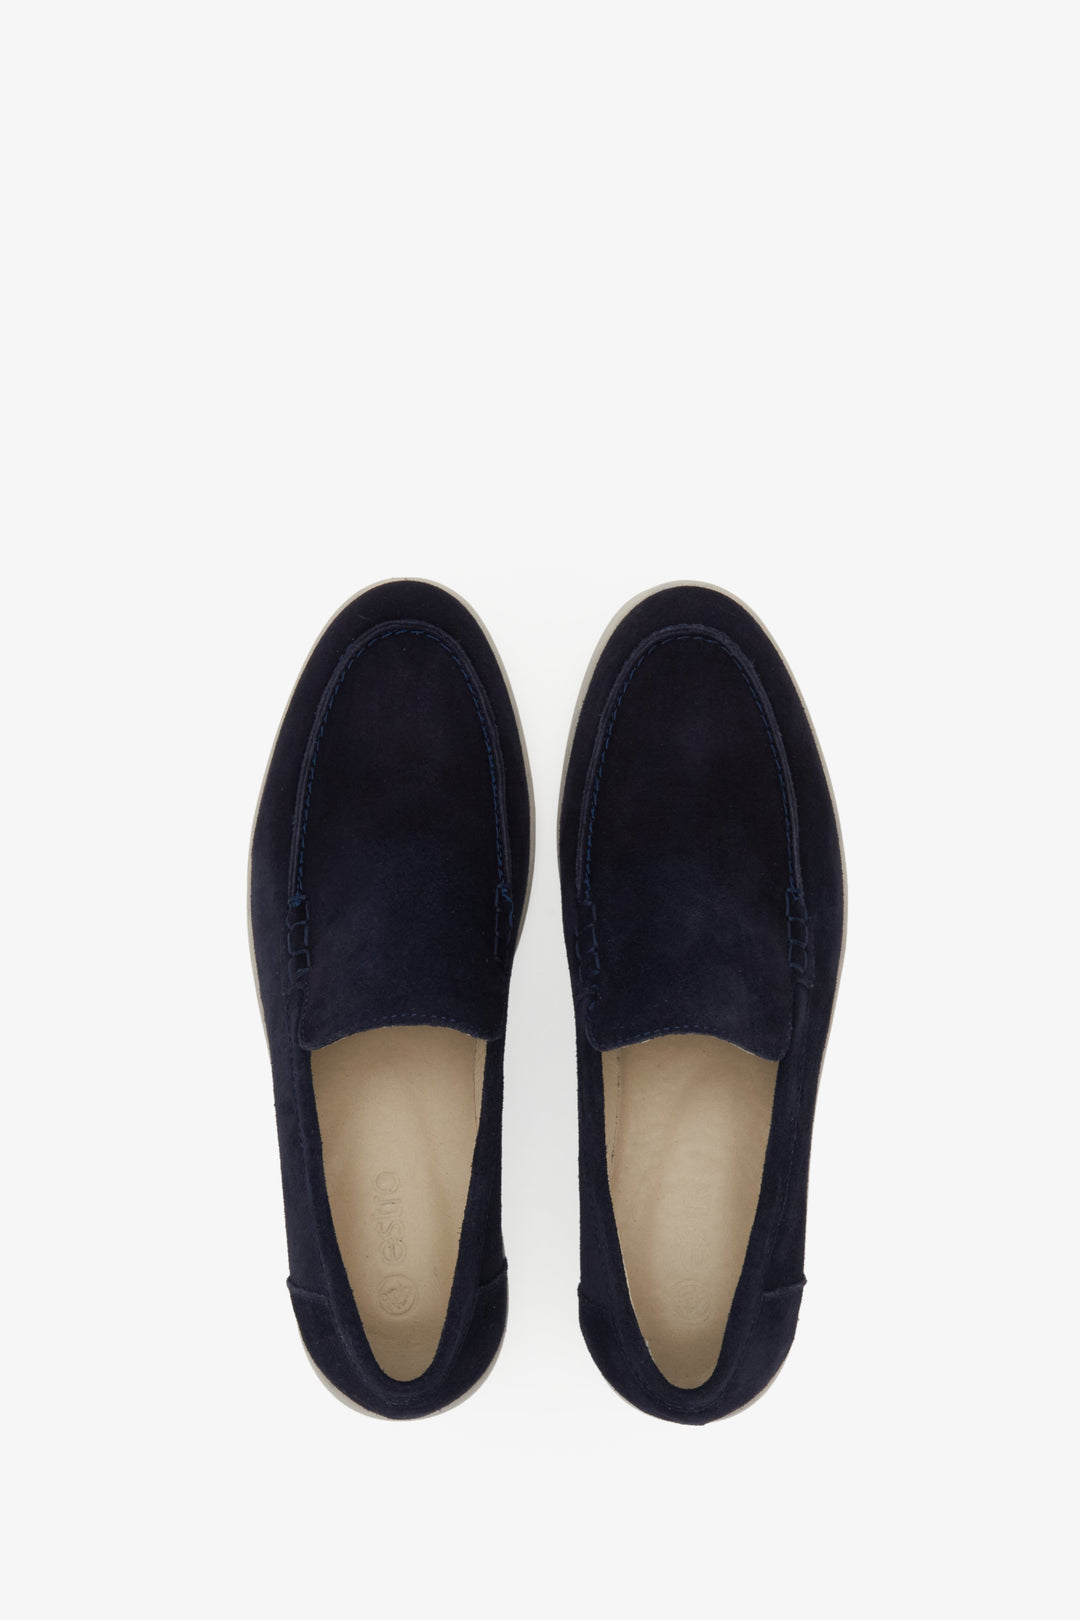 Women's suede moccasins in navy blue Estro - presentation of footwear from above.